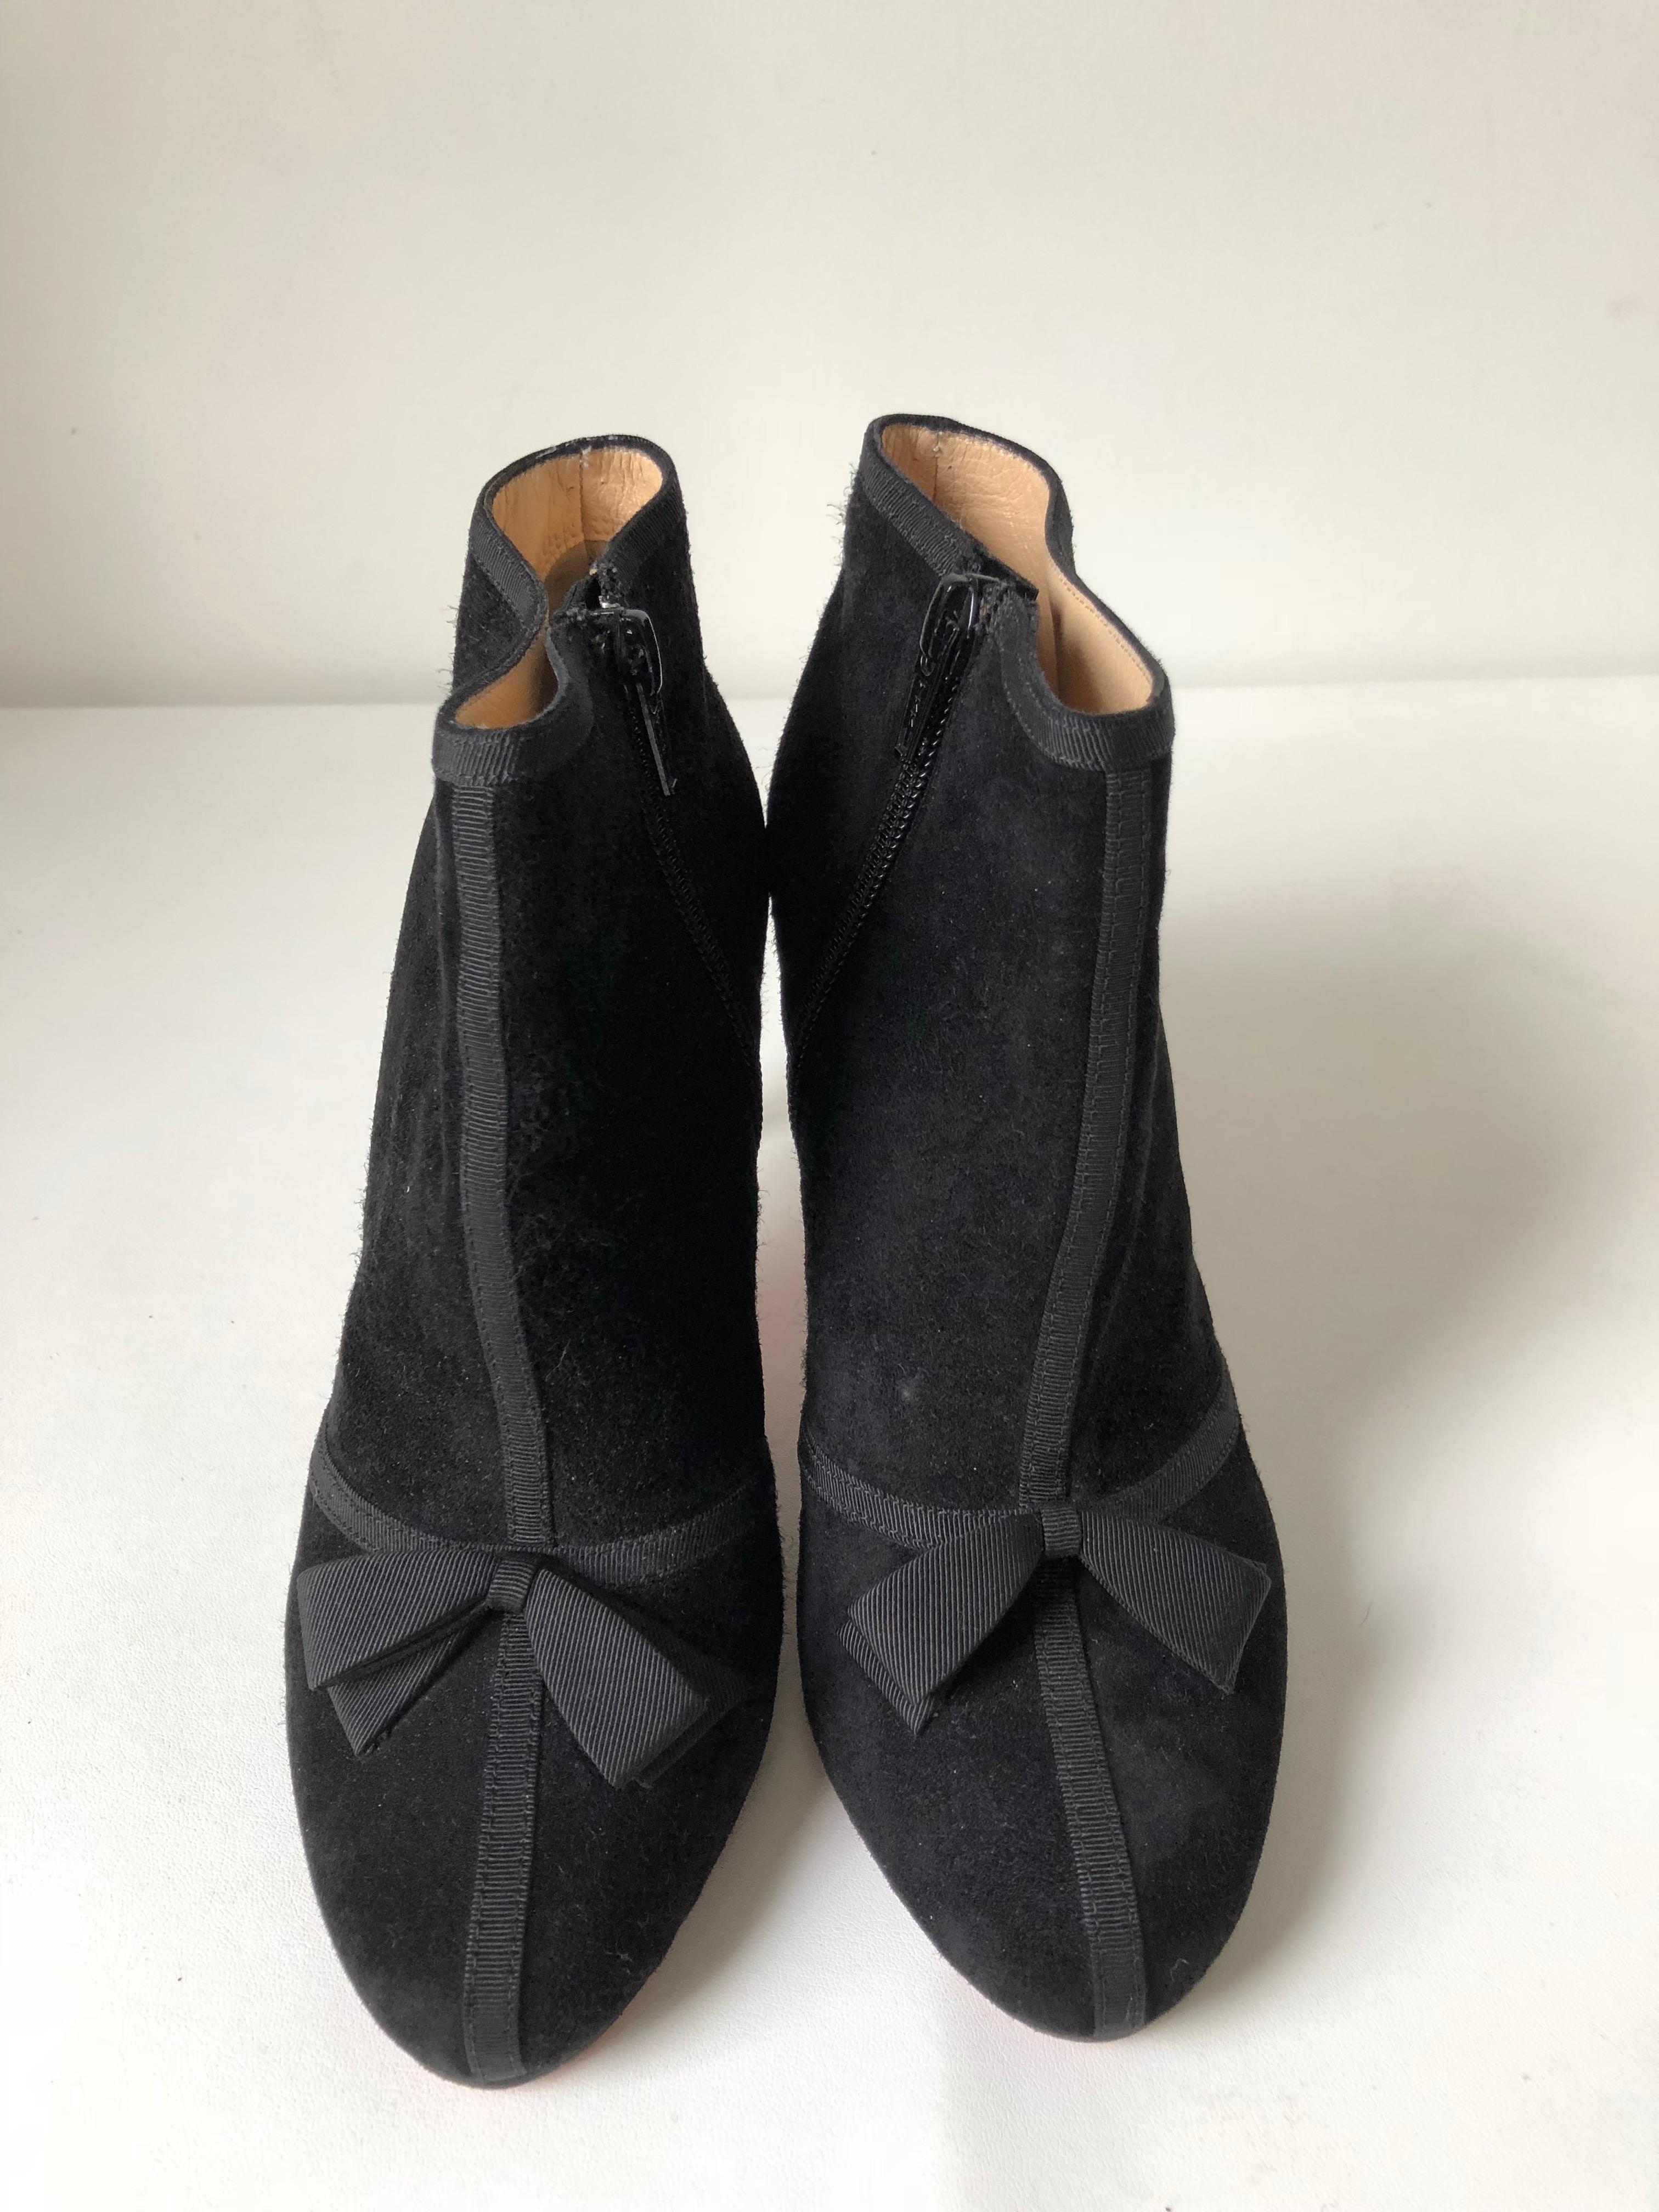 Black suede round toe booties with covered heels and side zipper.
Little bows adorn the top of the bootie. Heels are not too high!
Heel height 3